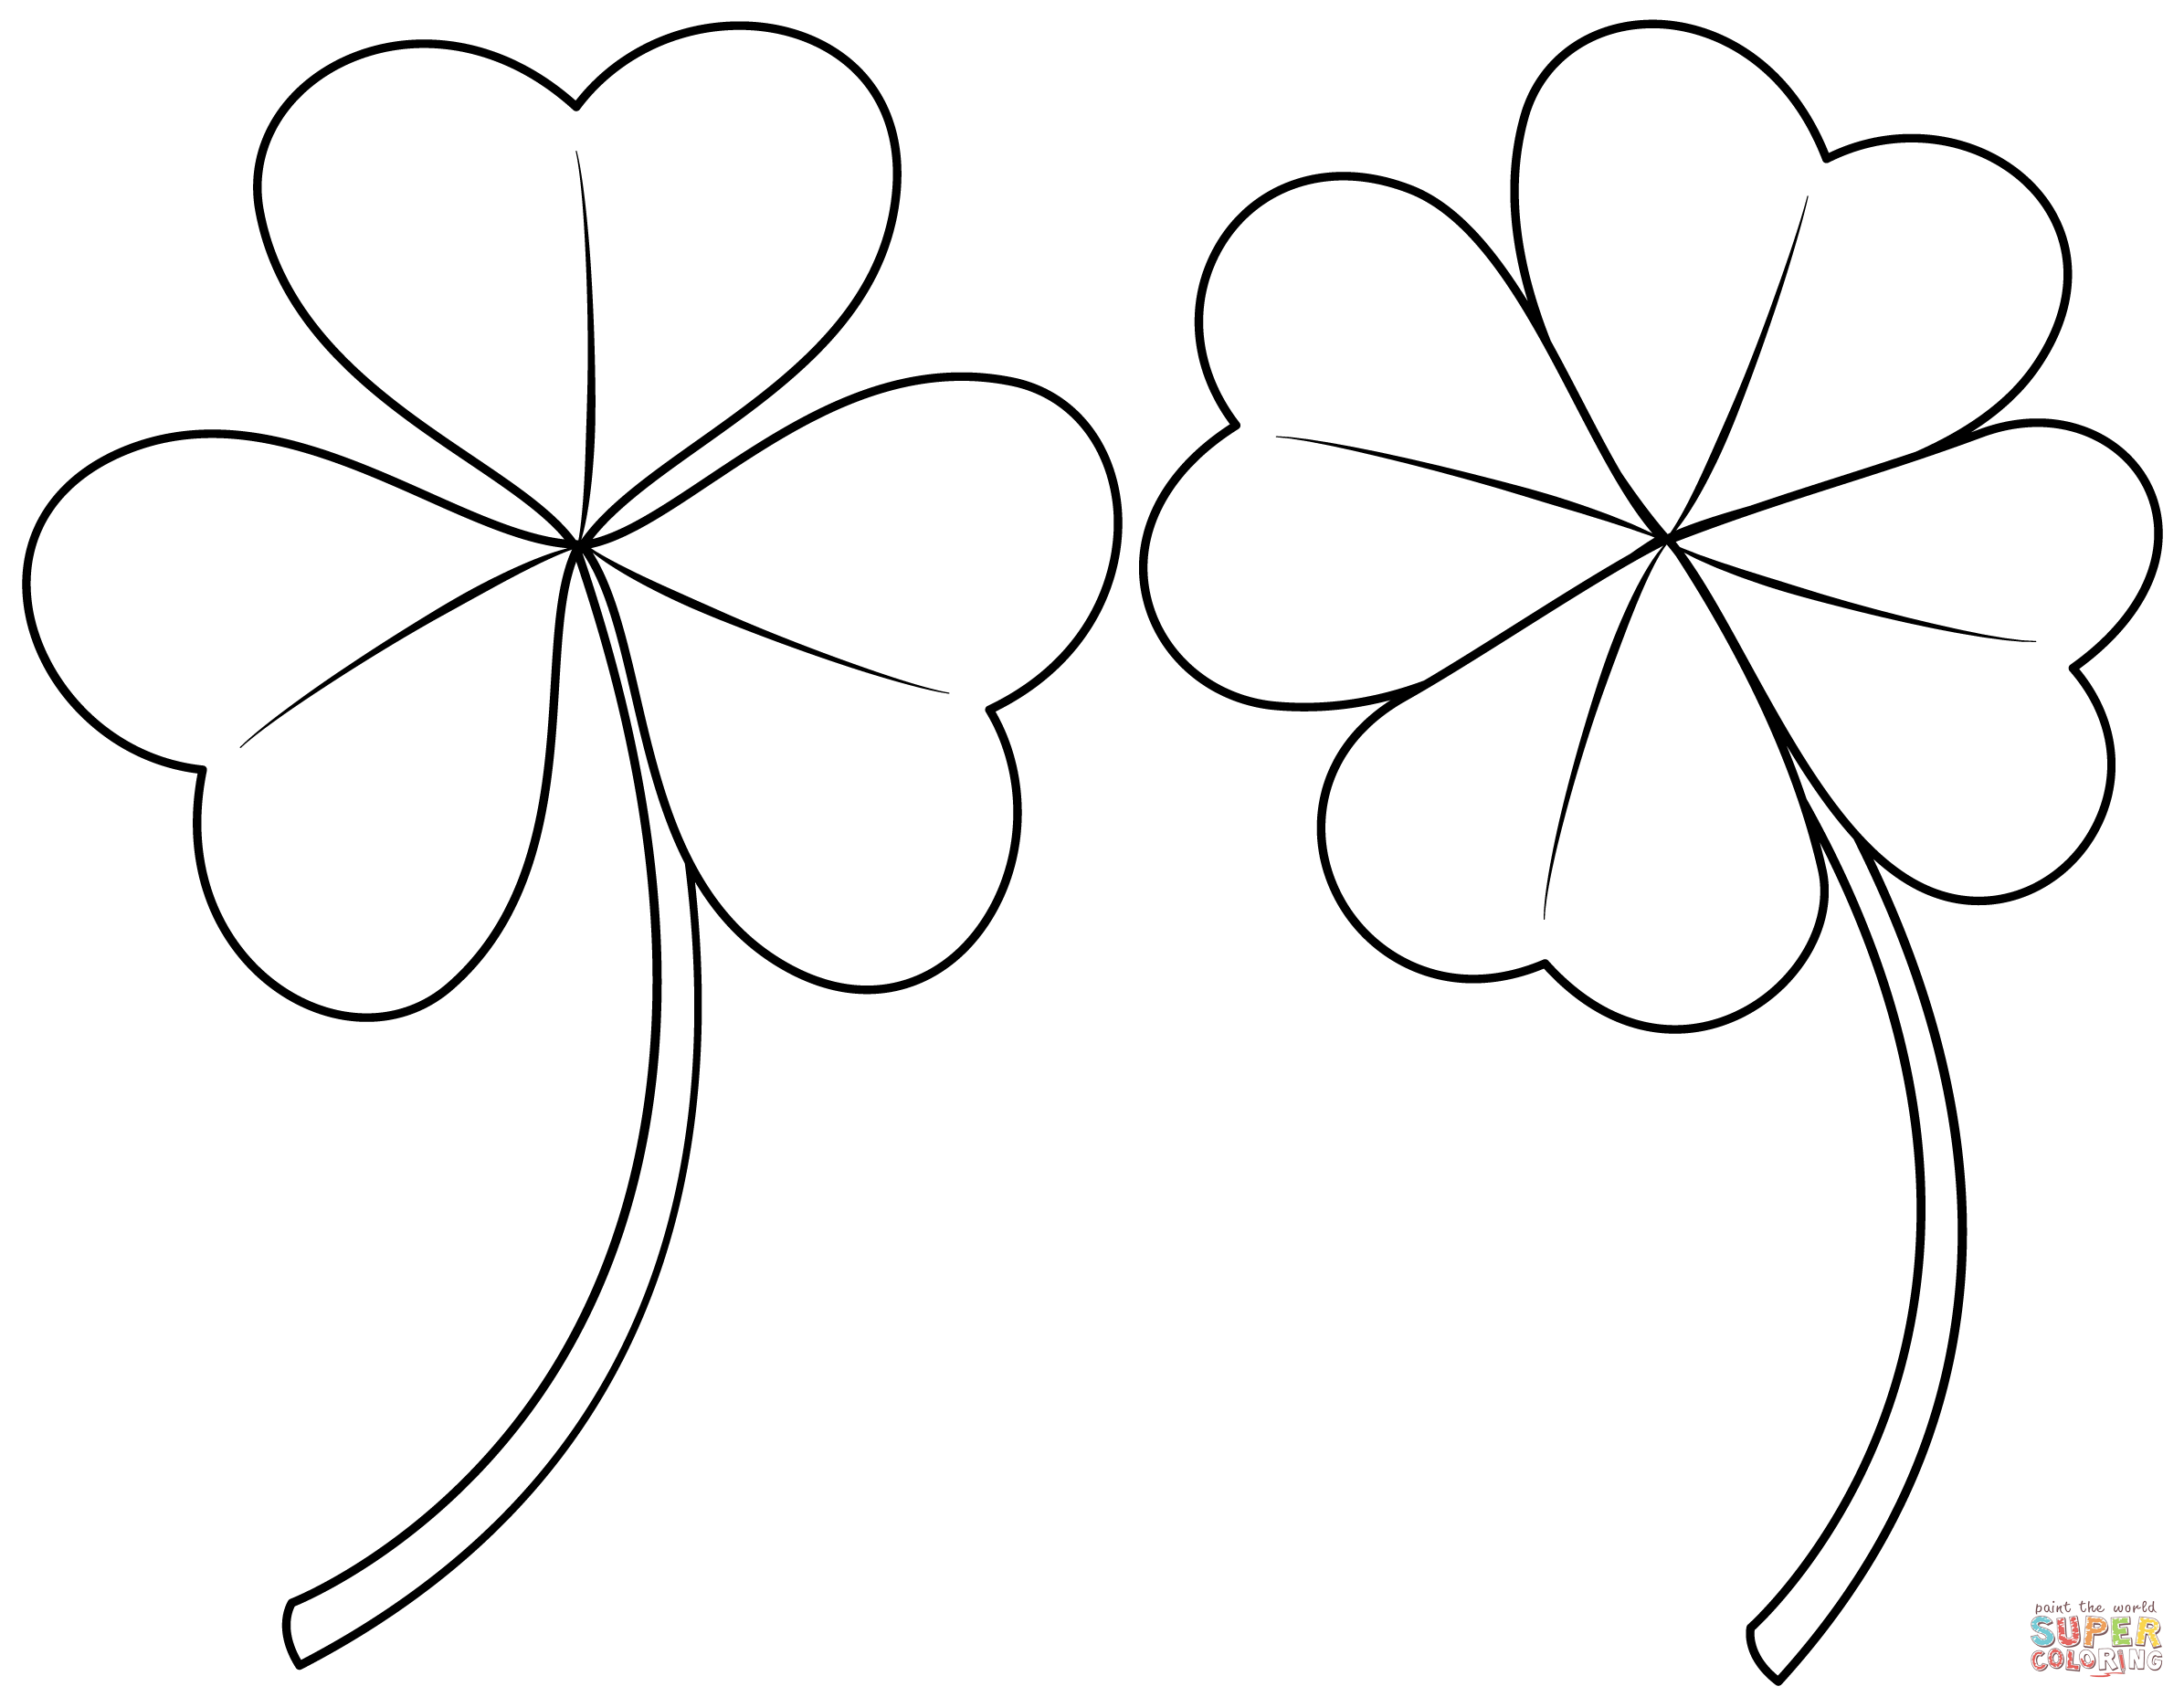 Shamrock coloring page free printable coloring pages